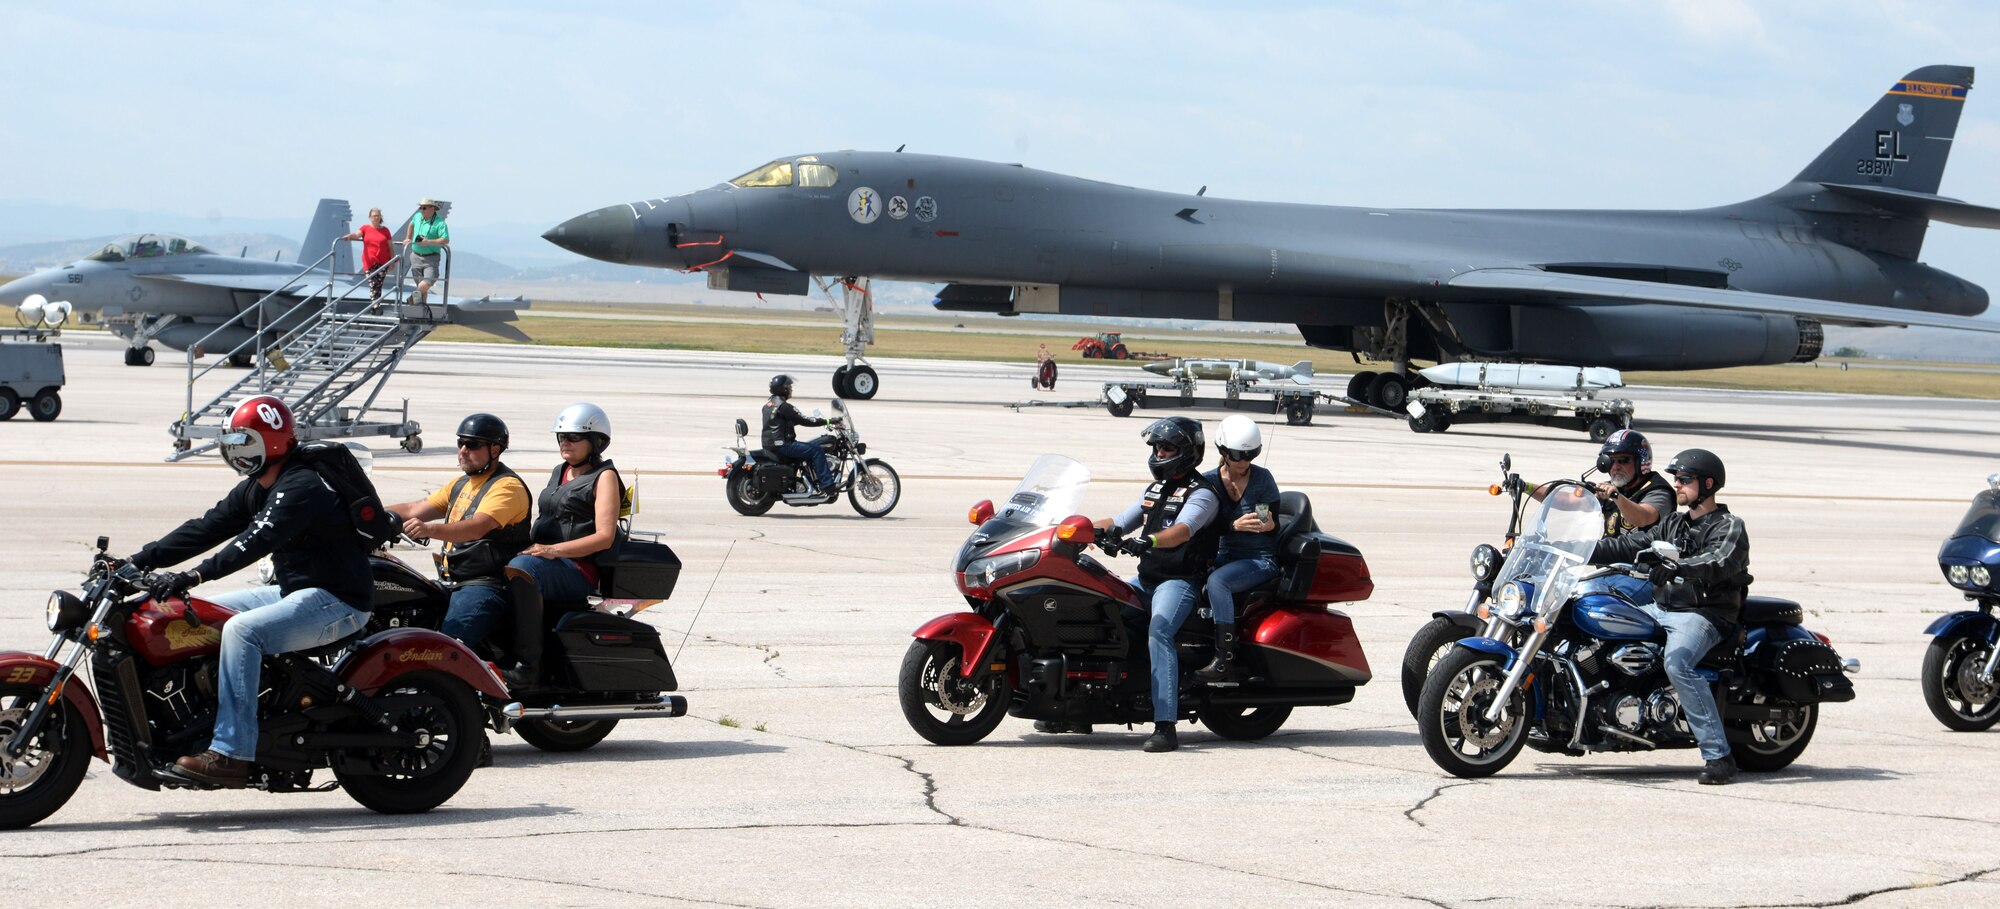 Motorcyclists pass by a B-1 bomber and an F-18 Super Hornet Aug 8, 2017 on the flight line at Ellsworth Air Force Base, S.D. The motorcycle ride ended at the Sturgis Veterans Appreciation Ceremony followed by with a flyover from a B-1 bomber over Main Street. (U.S. Air Force photo by Airman 1st Class Thomas Karol)